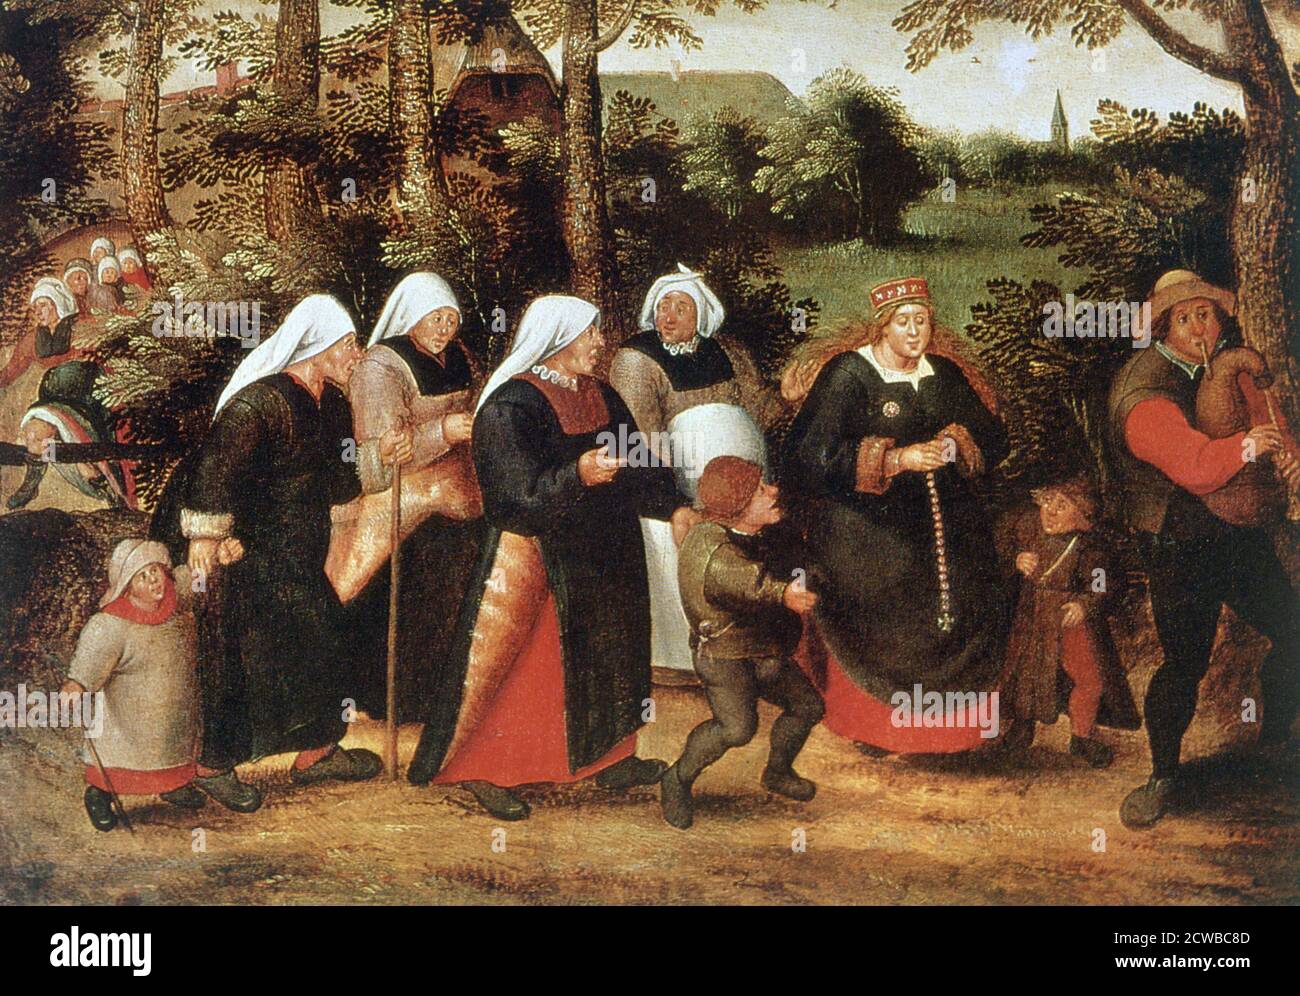 Painting by Pieter Brueghel the Younger titled 'The Procession of the Bride', c1584-1638. From the collection of the Art Museum of Estonia, Tallinn, Estonia. Stock Photo